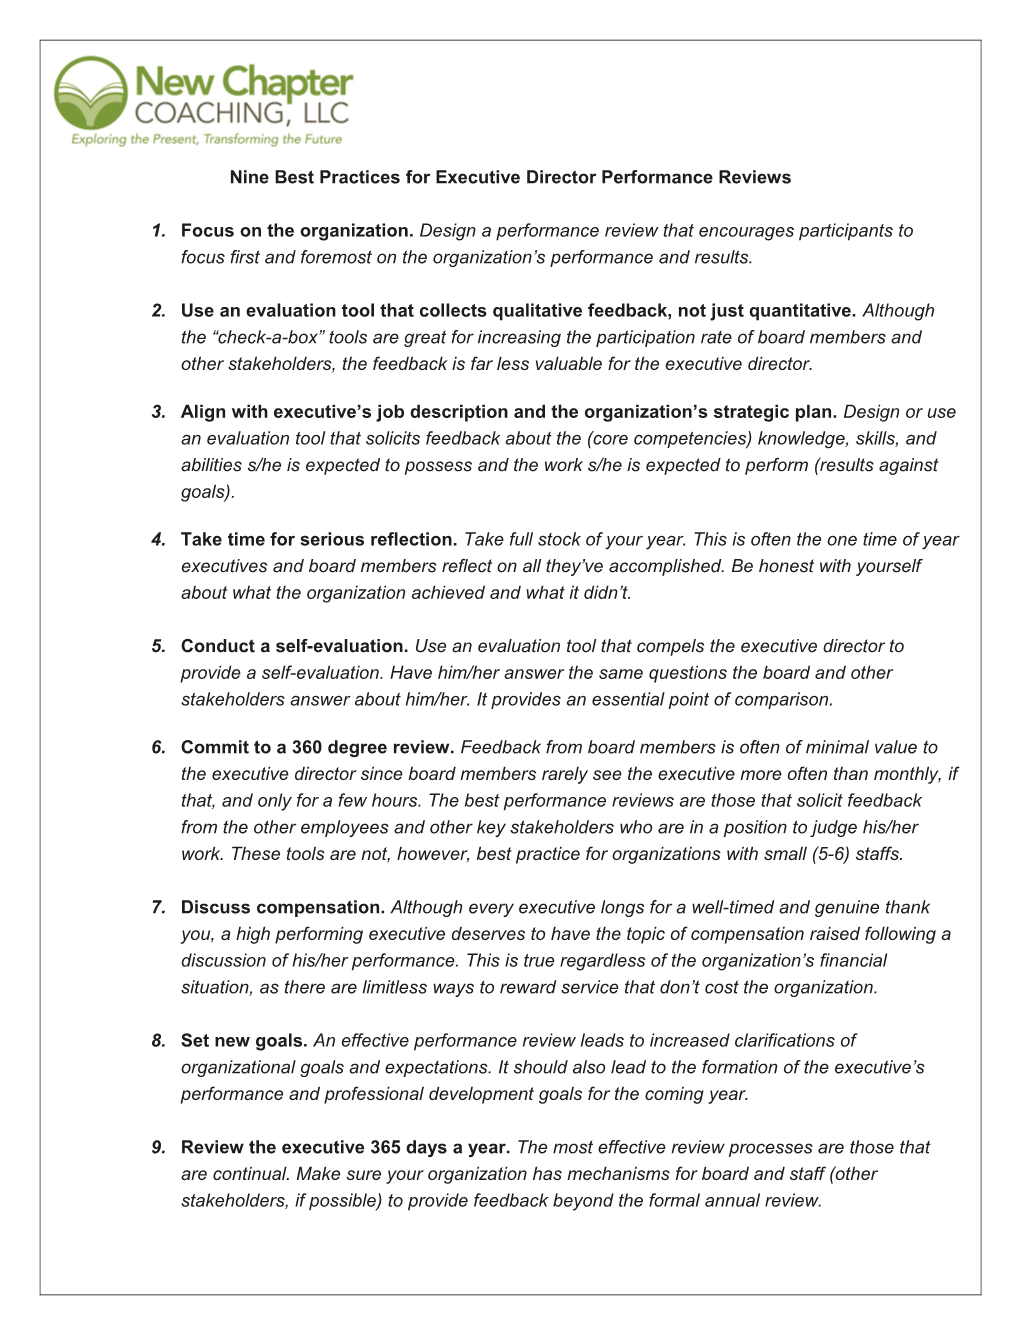 Ninebest Practices for Executive Director Performance Reviews